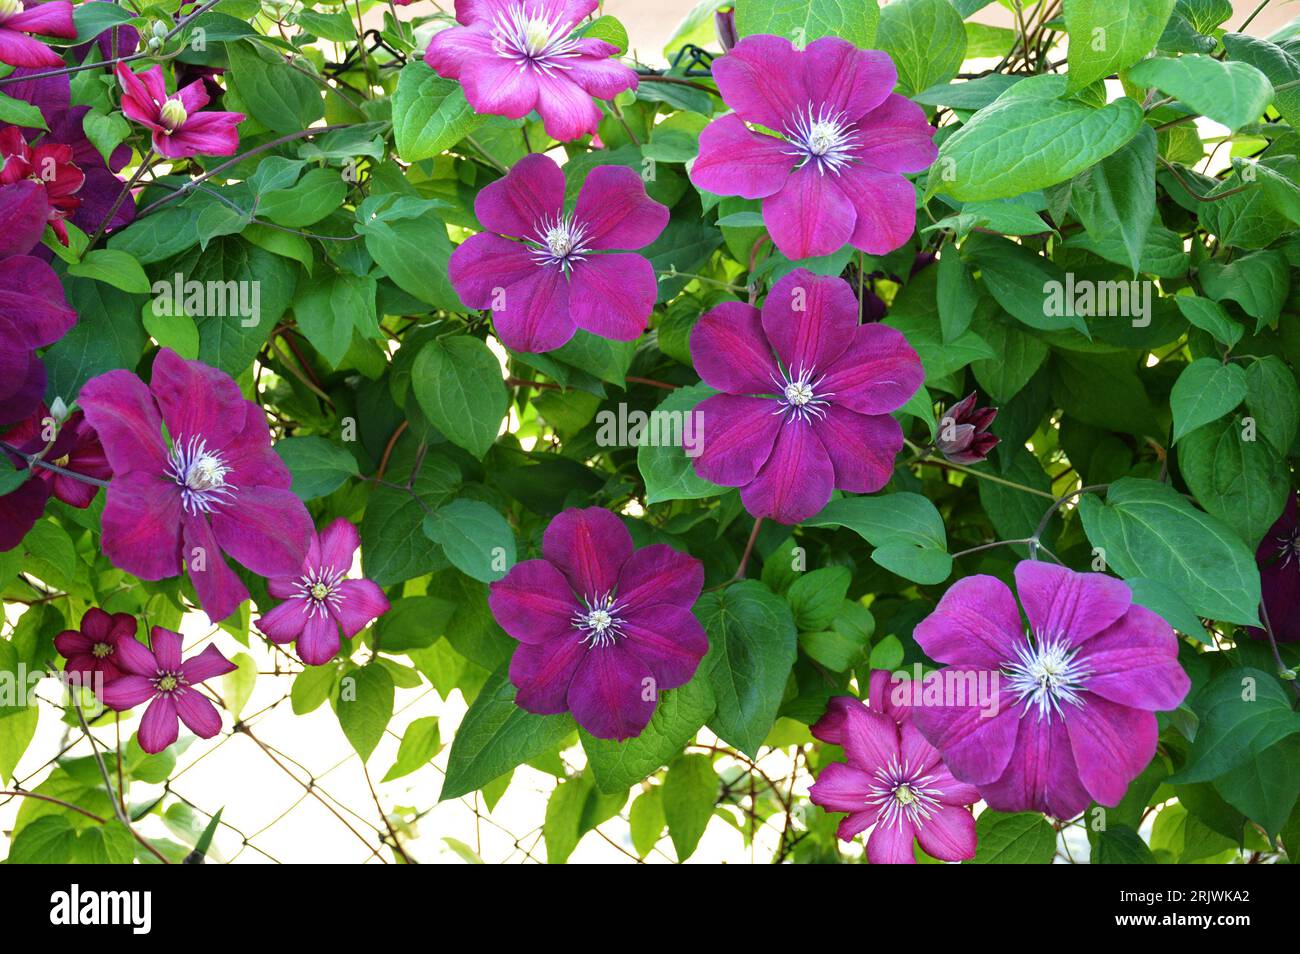 Clematis flower background. Climbing flower plant Stock Photo